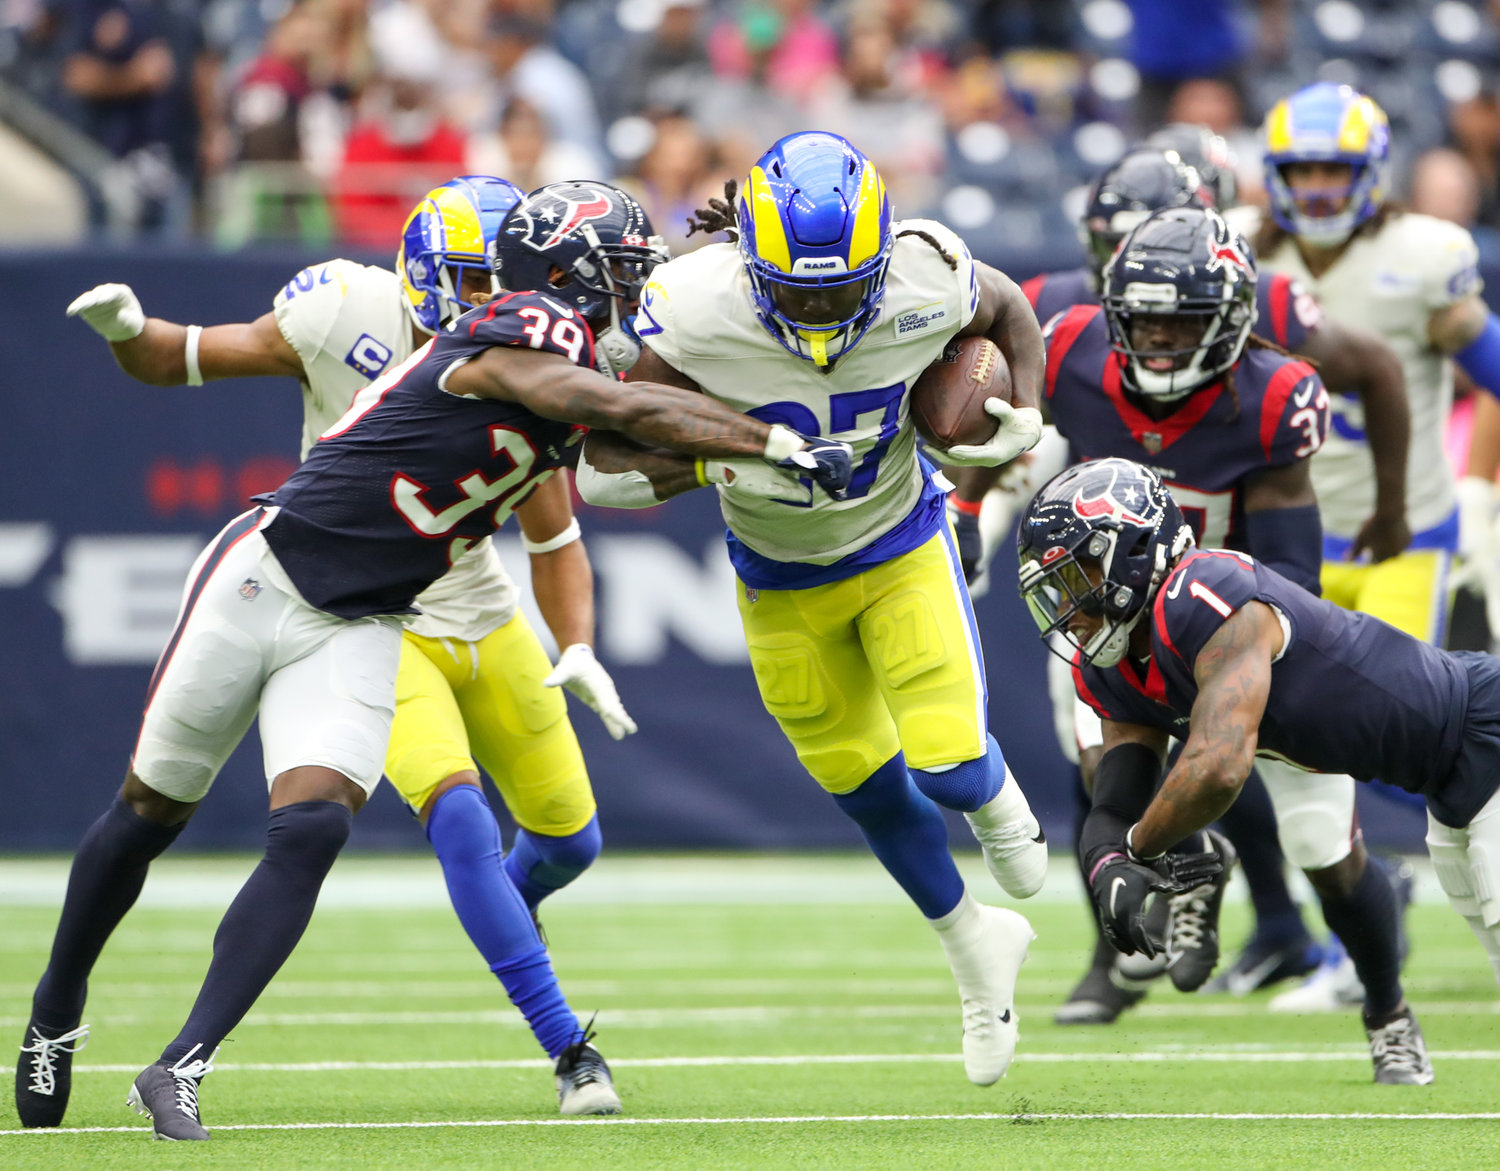 Los Angeles Rams running back Darrell Henderson Jr. (27) carries the ball during an NFL game between Houston and the Los Angeles Rams on October 31, 2021 in Houston, Texas.